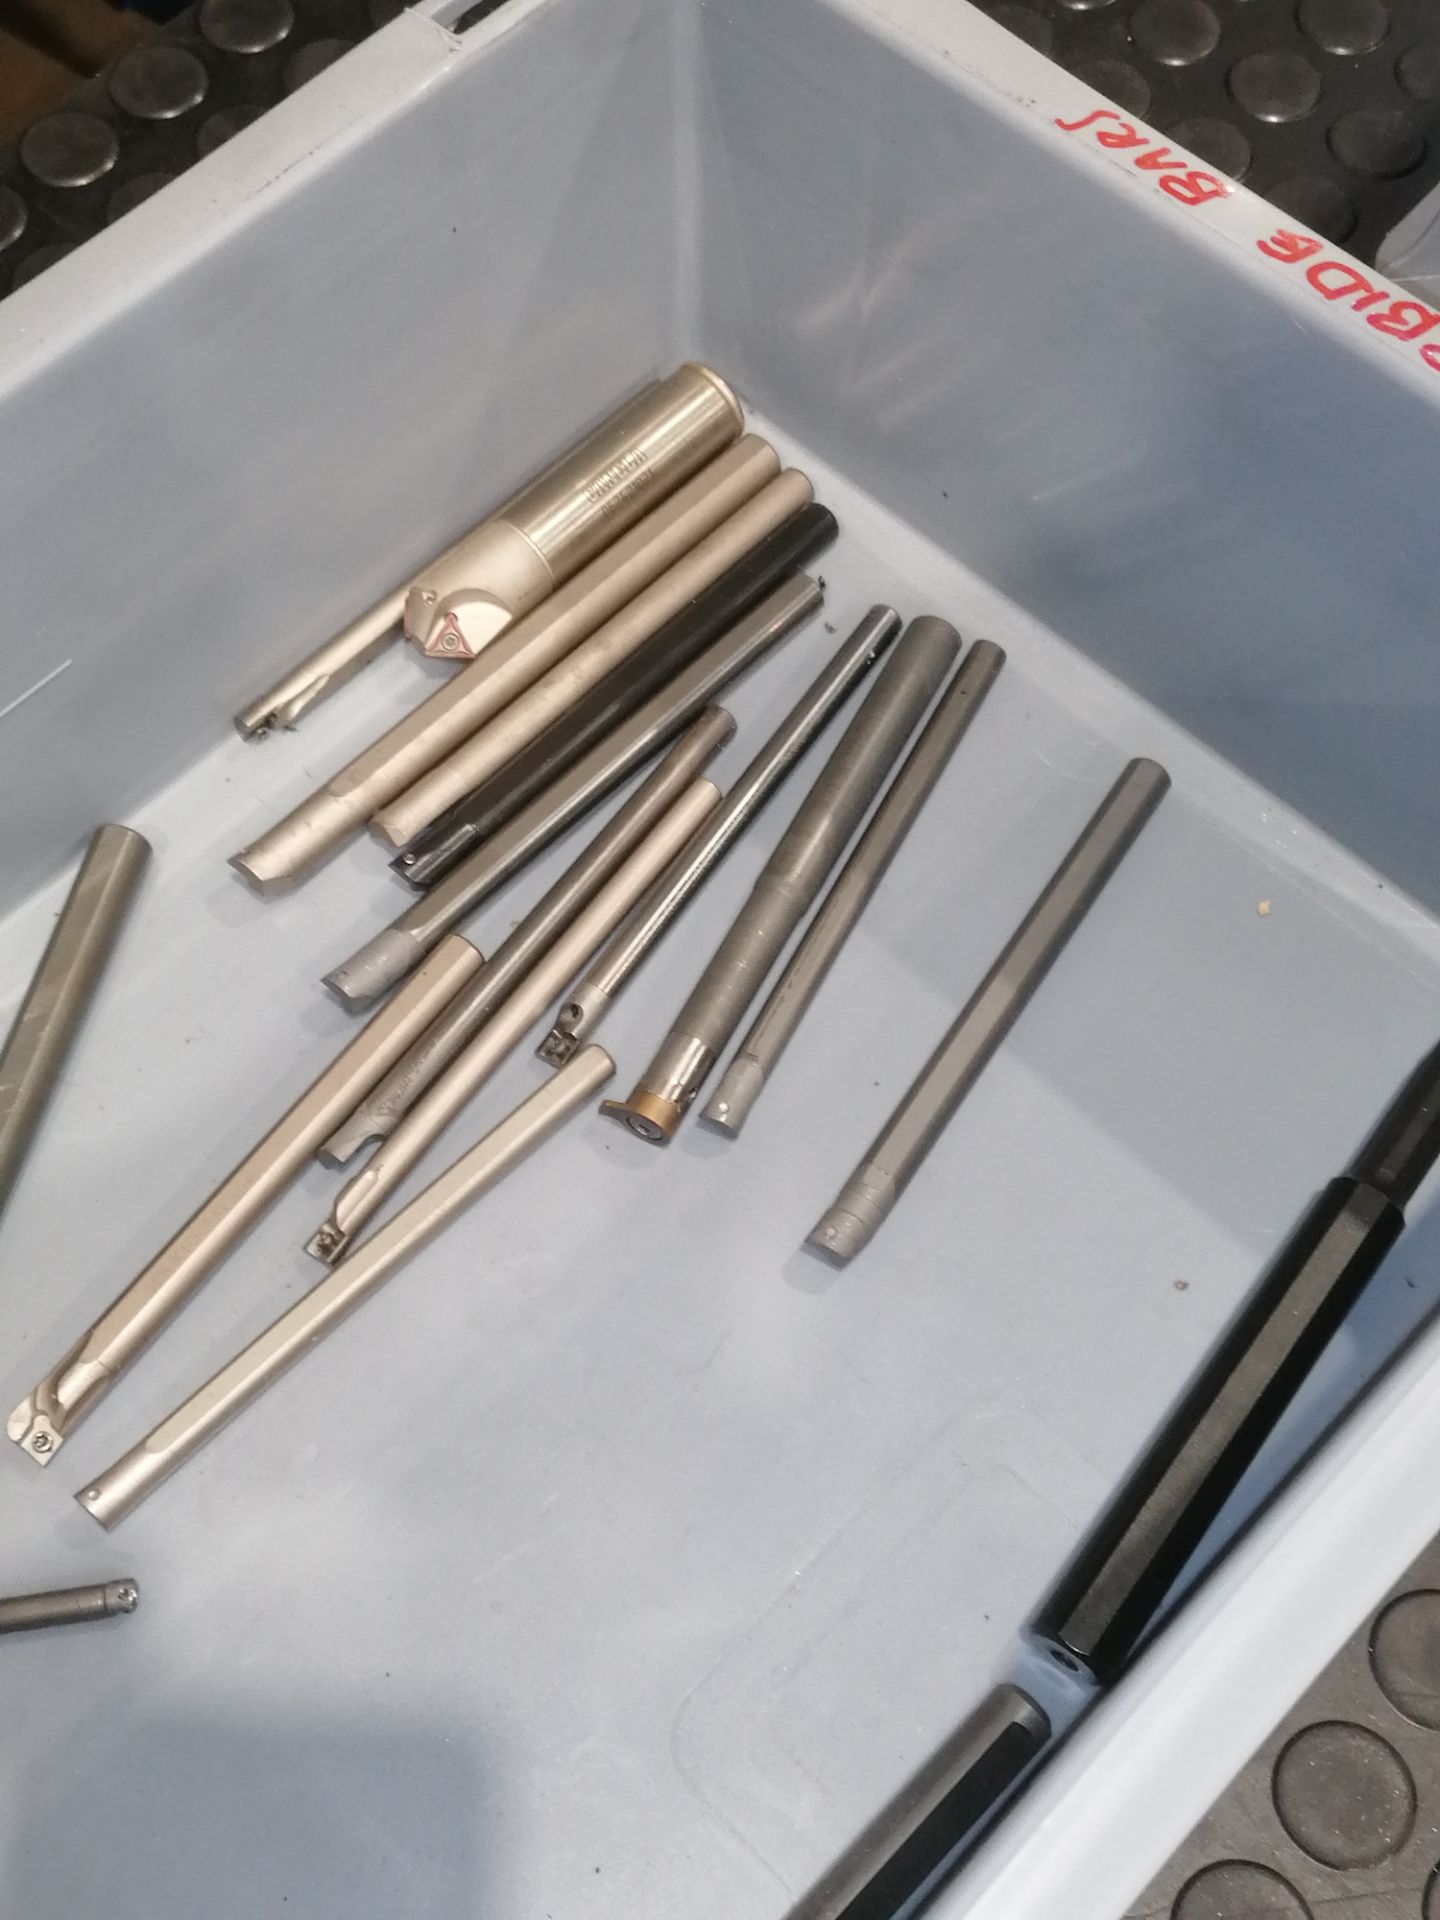 Carbide Boring Bars (Various Sizes) (Please Note: Plastic Container Boxes Are Not Included) - Image 3 of 6